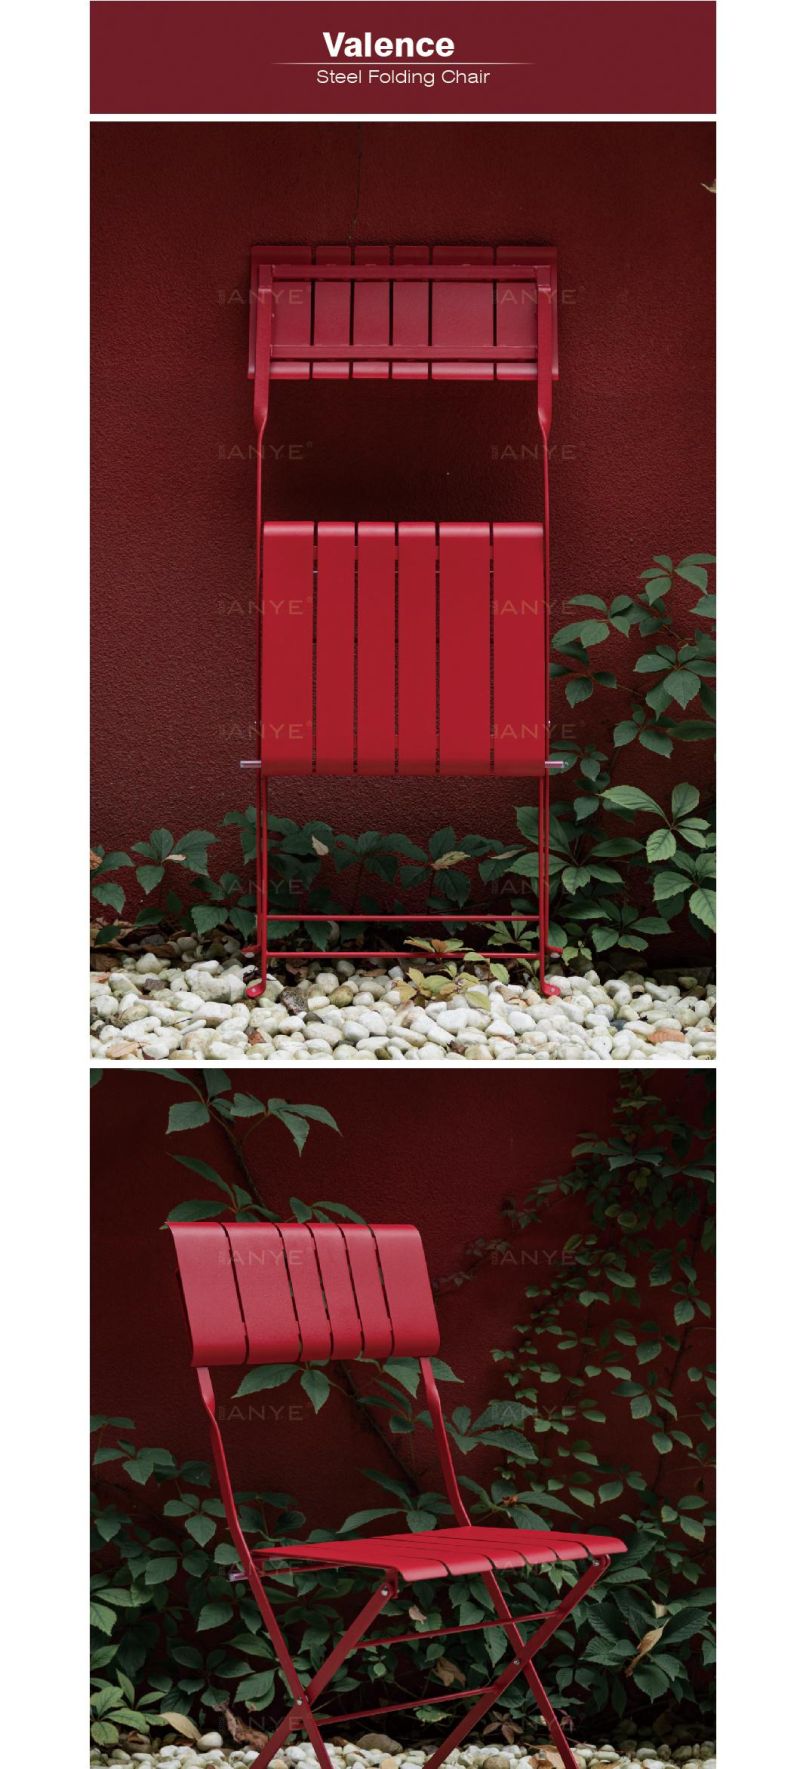 Commercial Museum Furniture Slats Design Space Saving Foldable Outdoor Chair